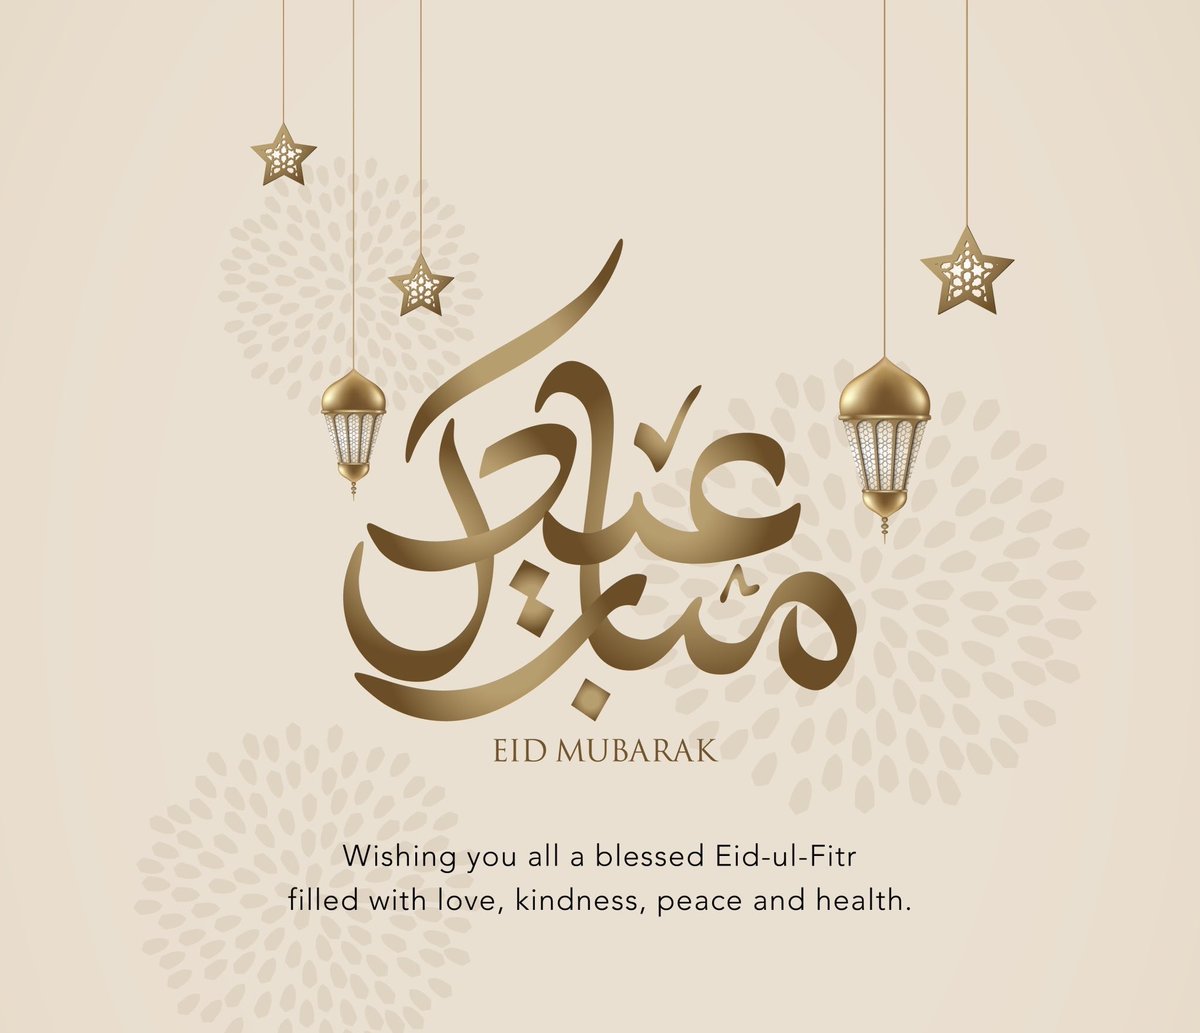 A Very Happy #EidAlFitr to everyone ! Let’s Celebrate it with Kindness, Compassion and Empathy which is Central to the Islamic Faith